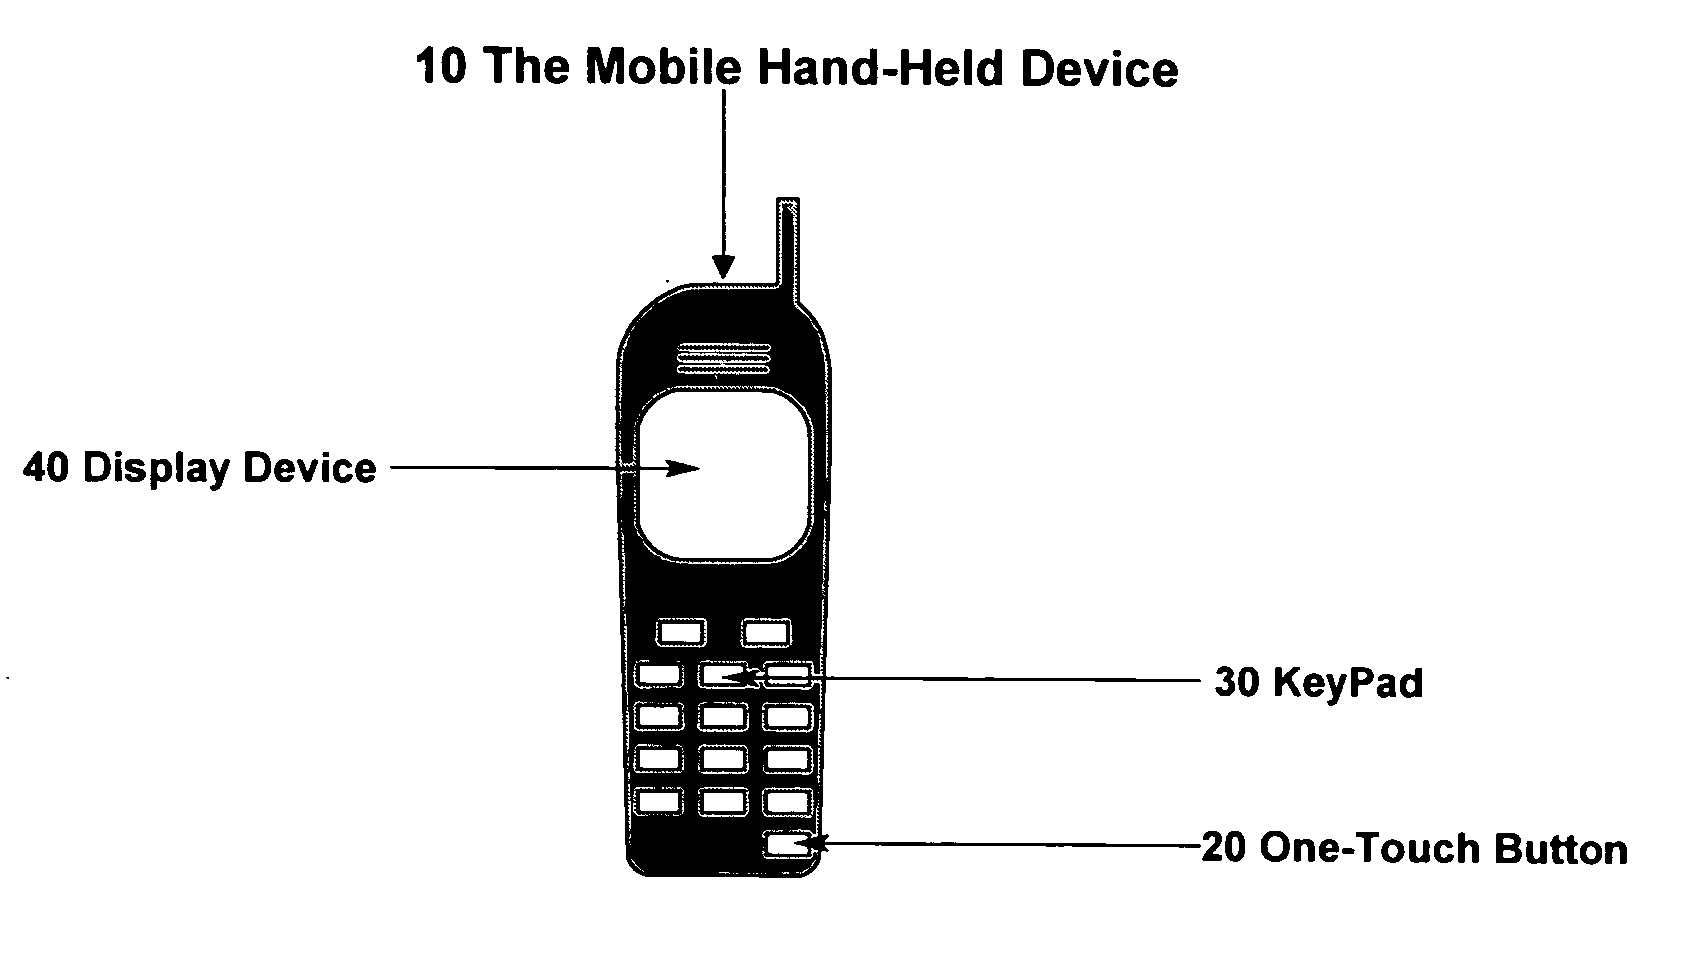 Method and apparatus for generating one-time password on hand-held mobile device